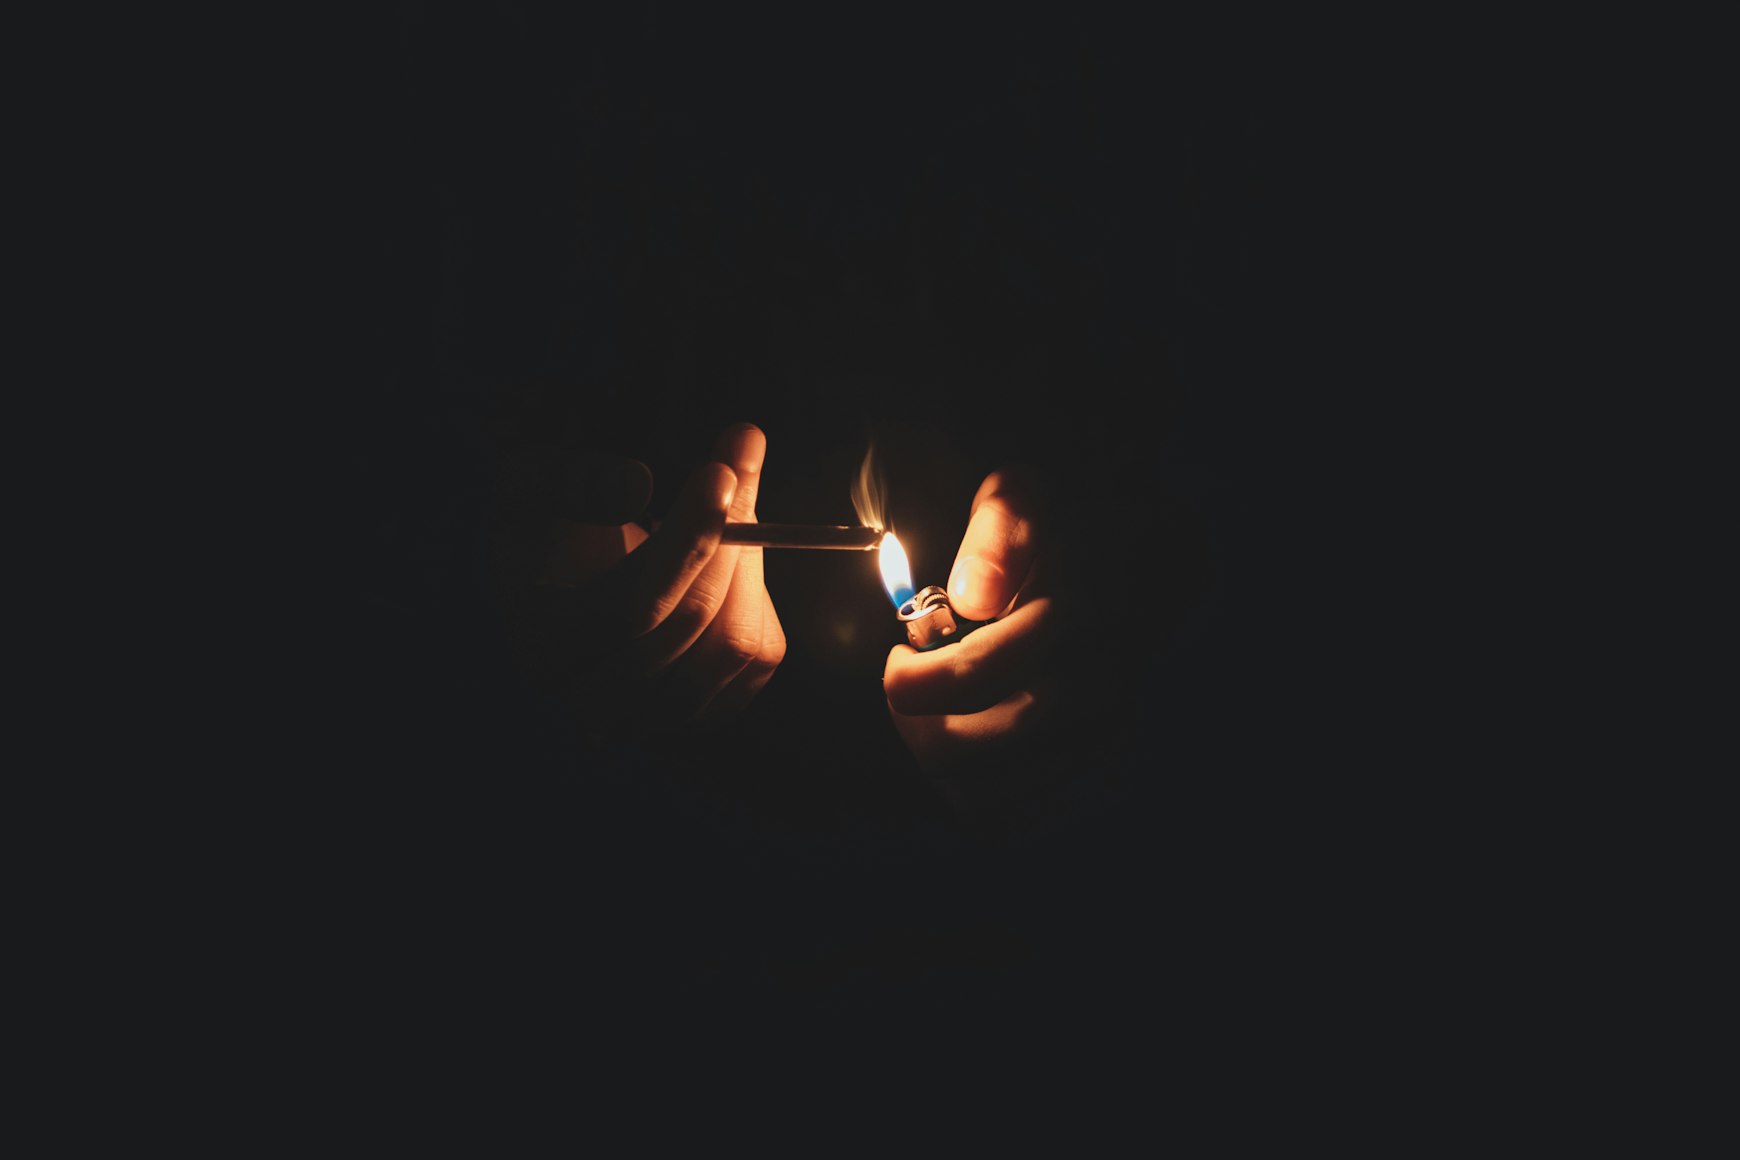 A pair of hands emerge out of the dark to light a blunt